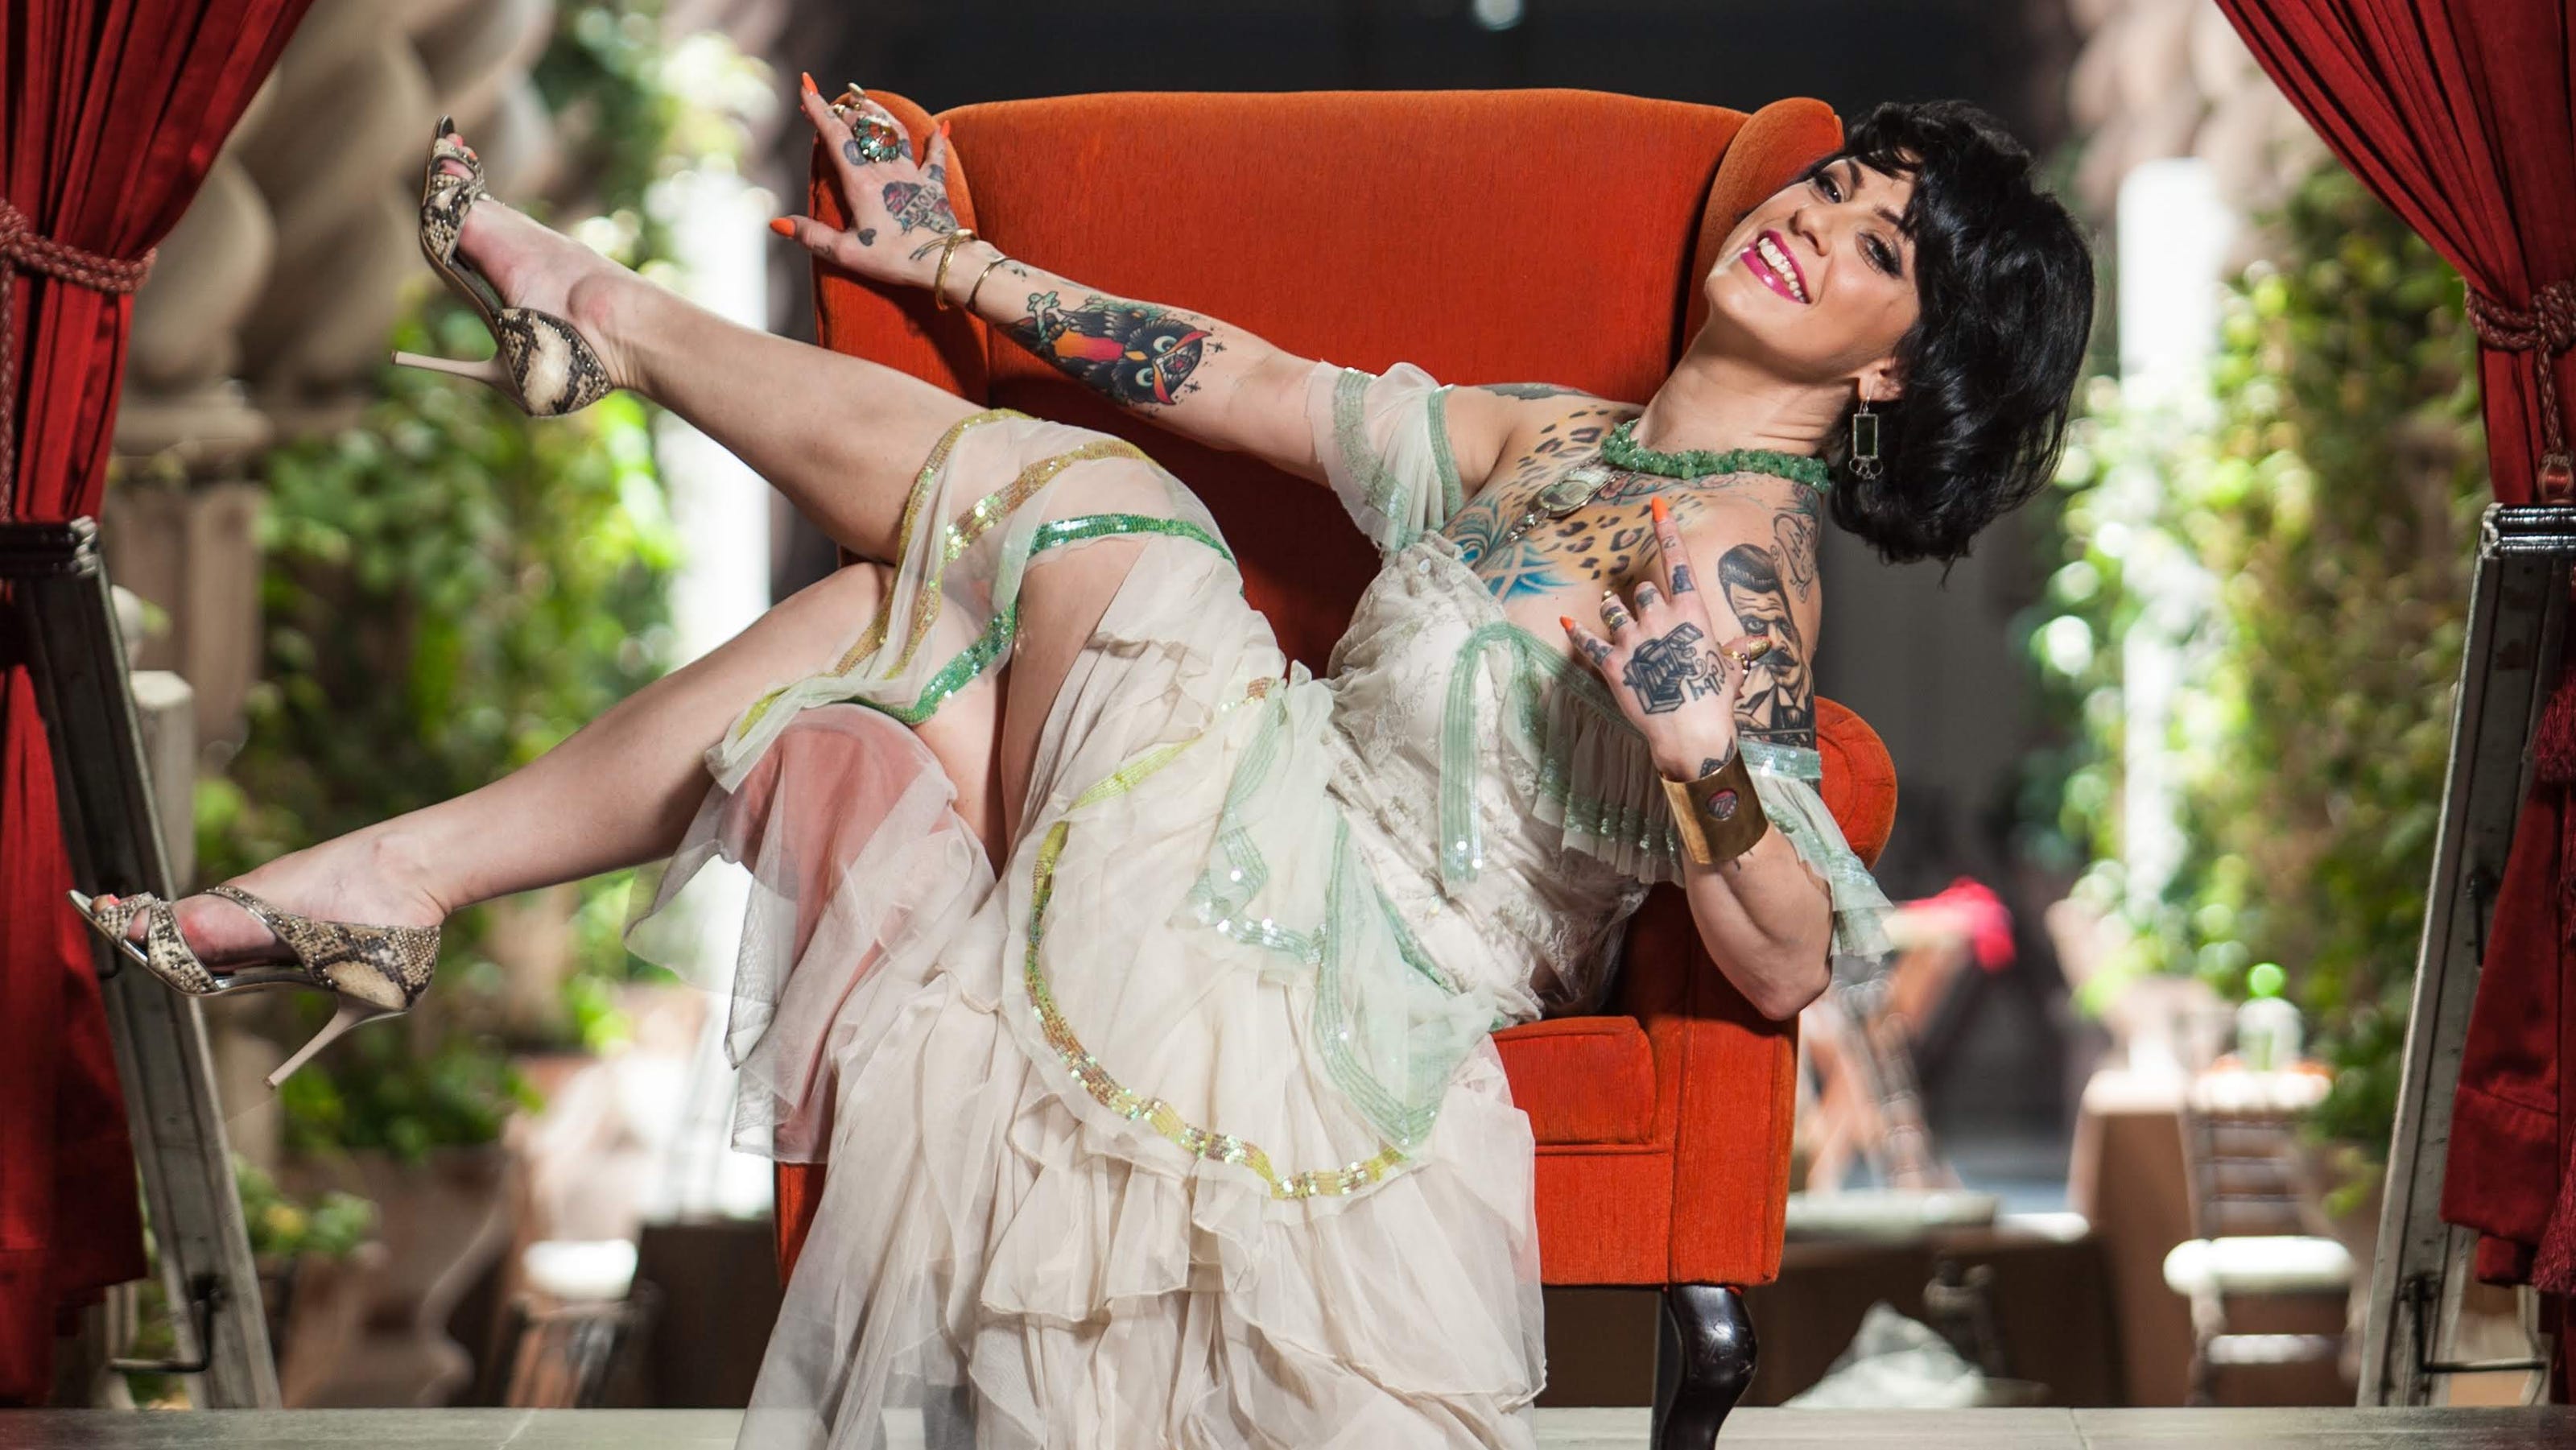 Burlesque show starring Danielle Colby of ‘American Pickers’ will raise fun...